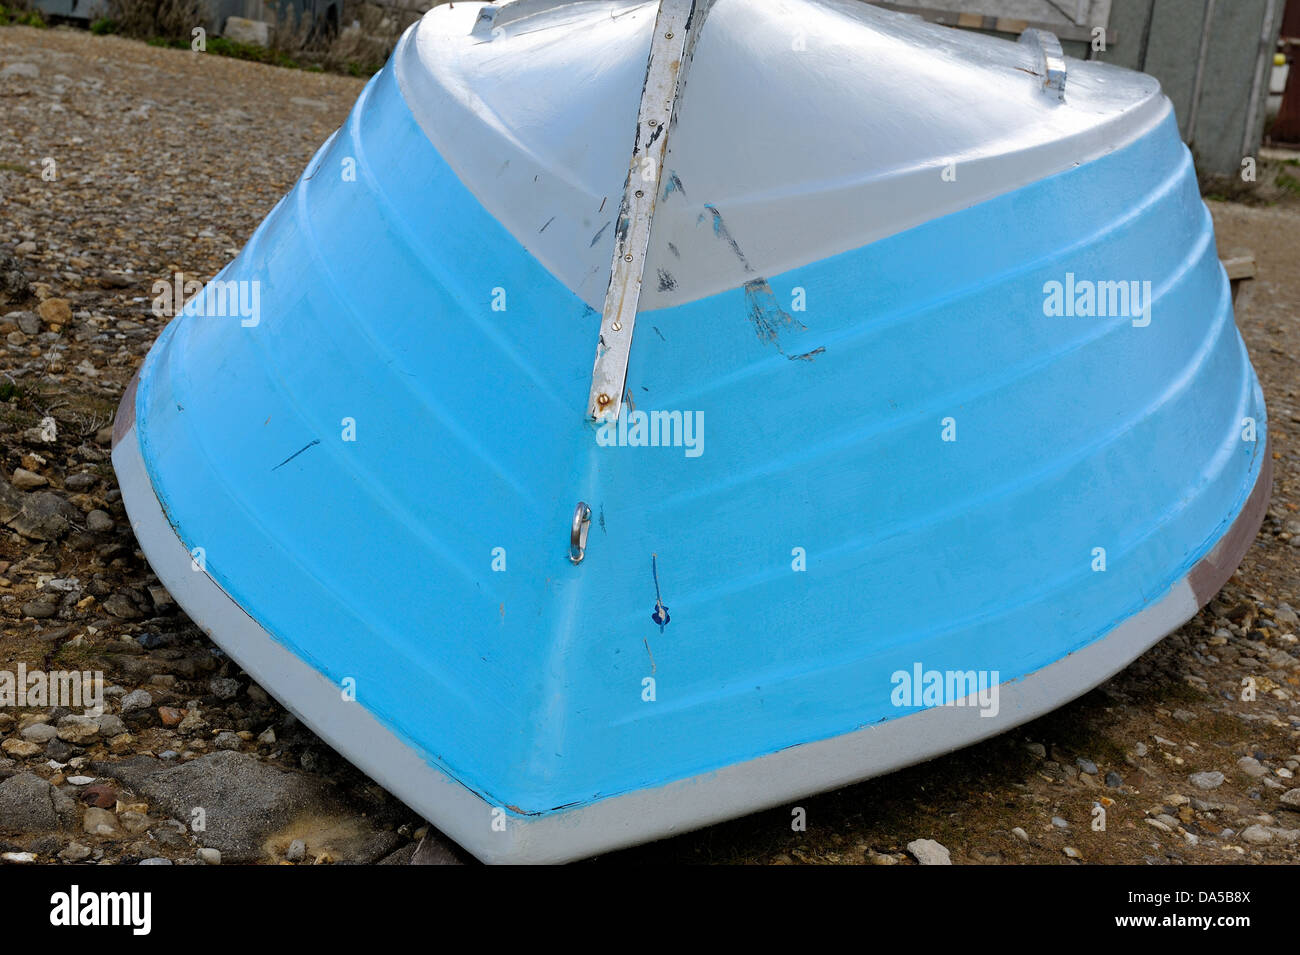 Blue rowing boat upside down on a beach Stock Photo